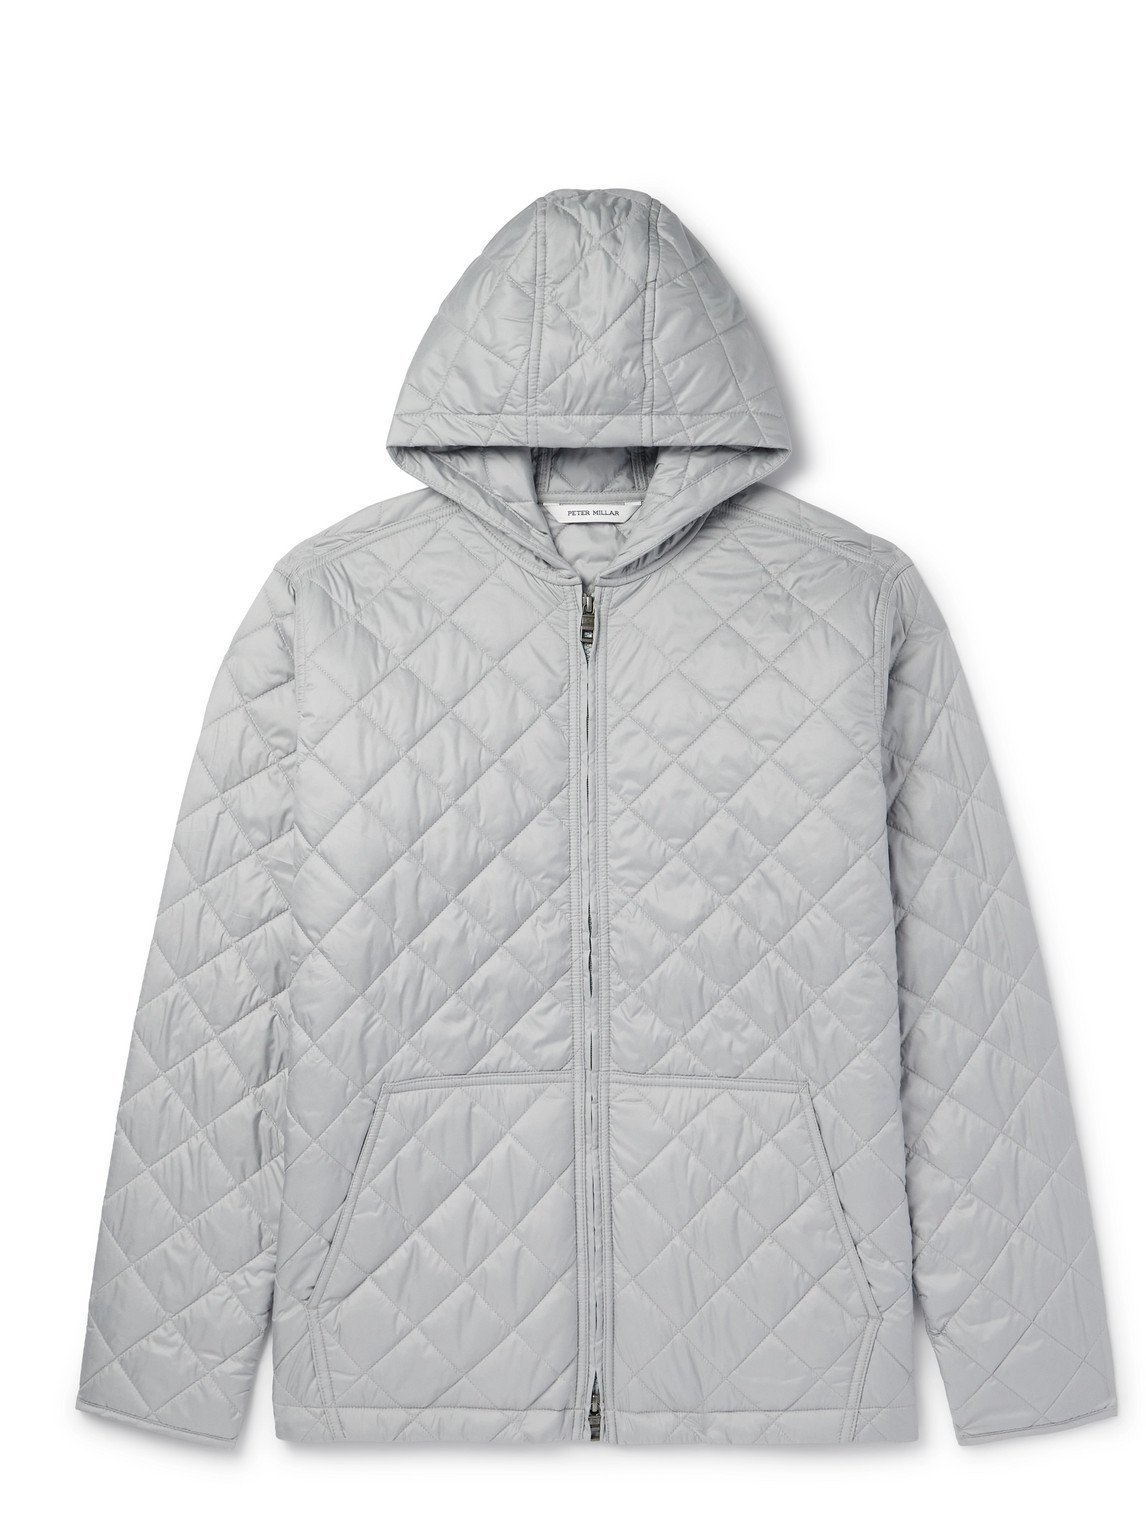 Peter Millar Essex Quilted Shell Jacket In Gray